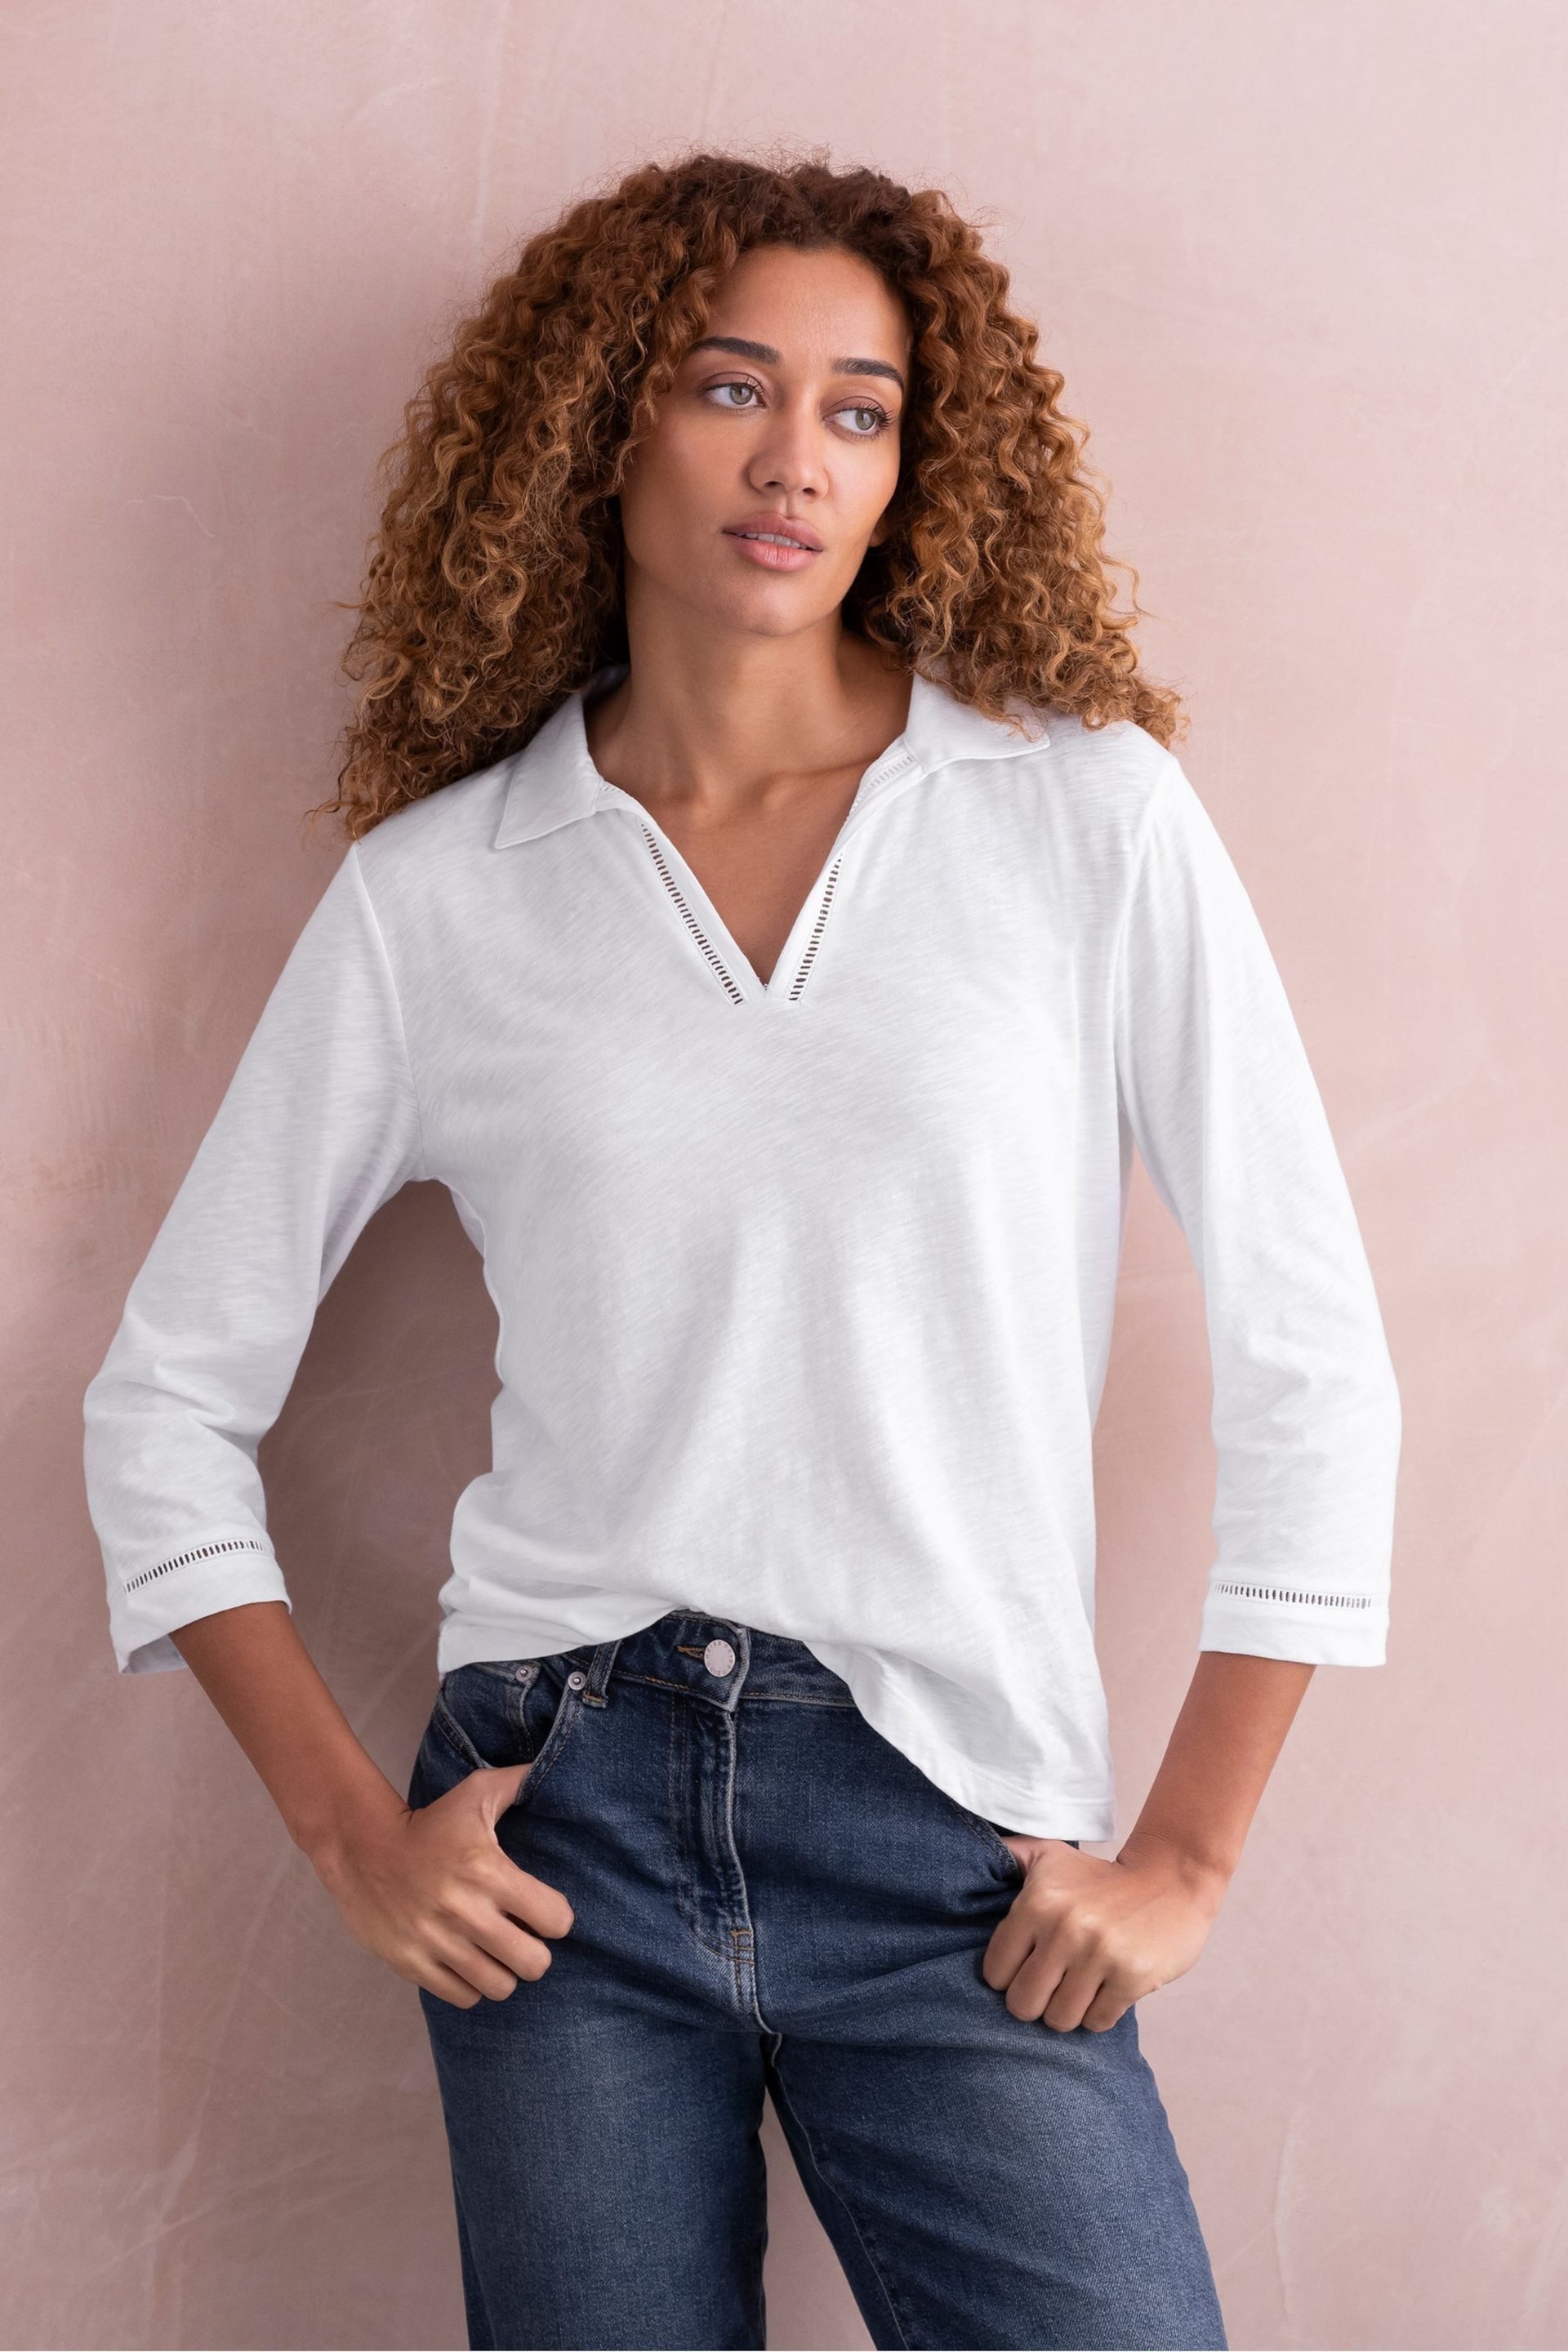 Celtic & Co. Organic Cotton Jersey Trim Detail White Polo Top - Image 2 of 5